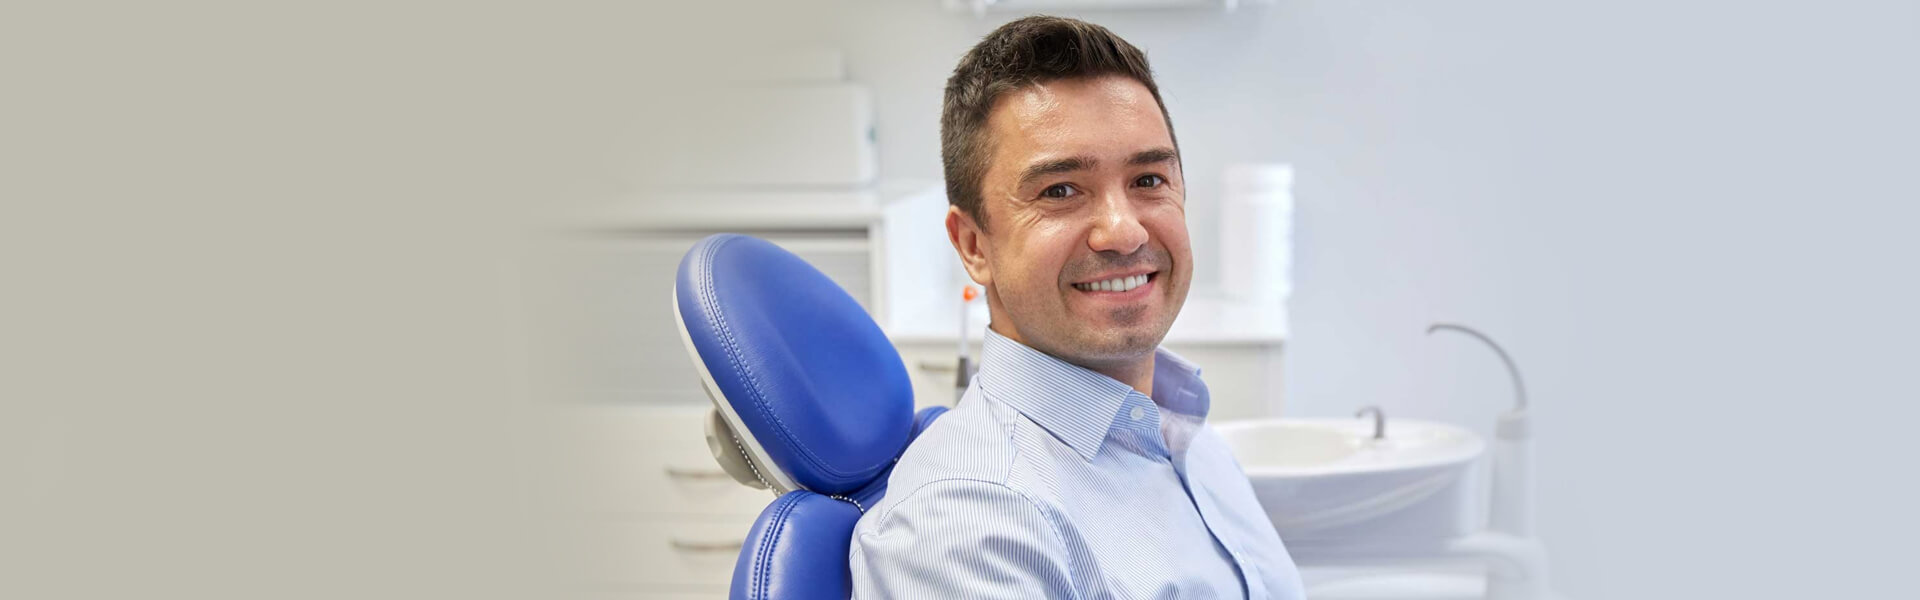 Dental Bonding: What to Expect If You Have Your Teeth Bonded?